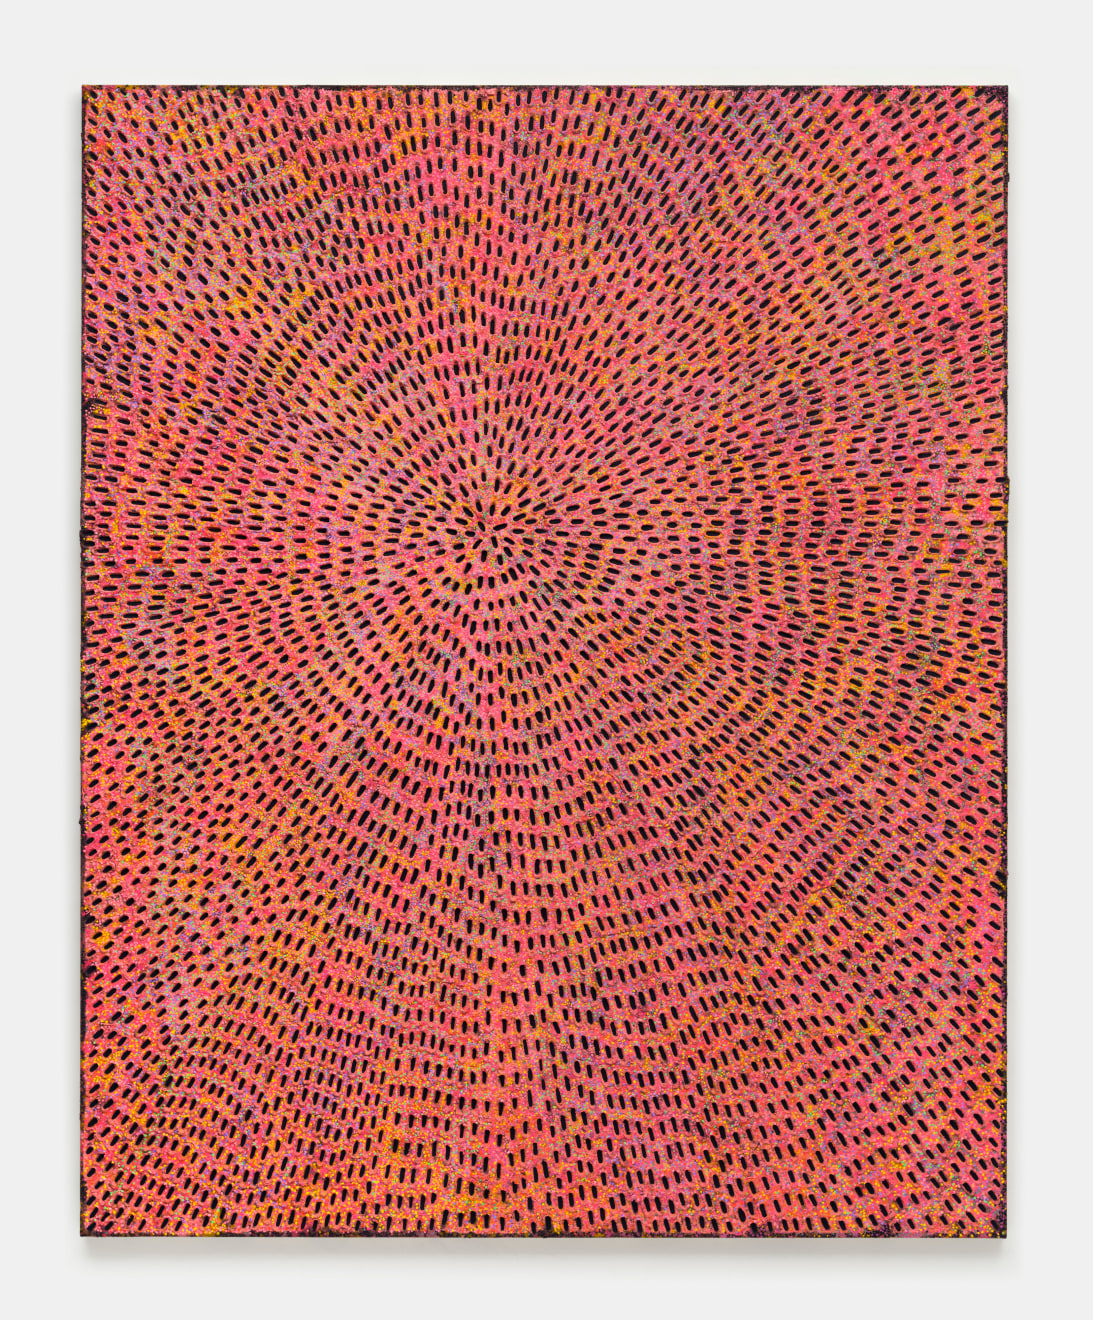 Jennifer Guidi, Till Sunbeams Find You (Painted White Sand, Orange, Pink, Hot Pink, Yellow, Turquoise, Lavender and Purple, Black Fill), 2021 - 2022